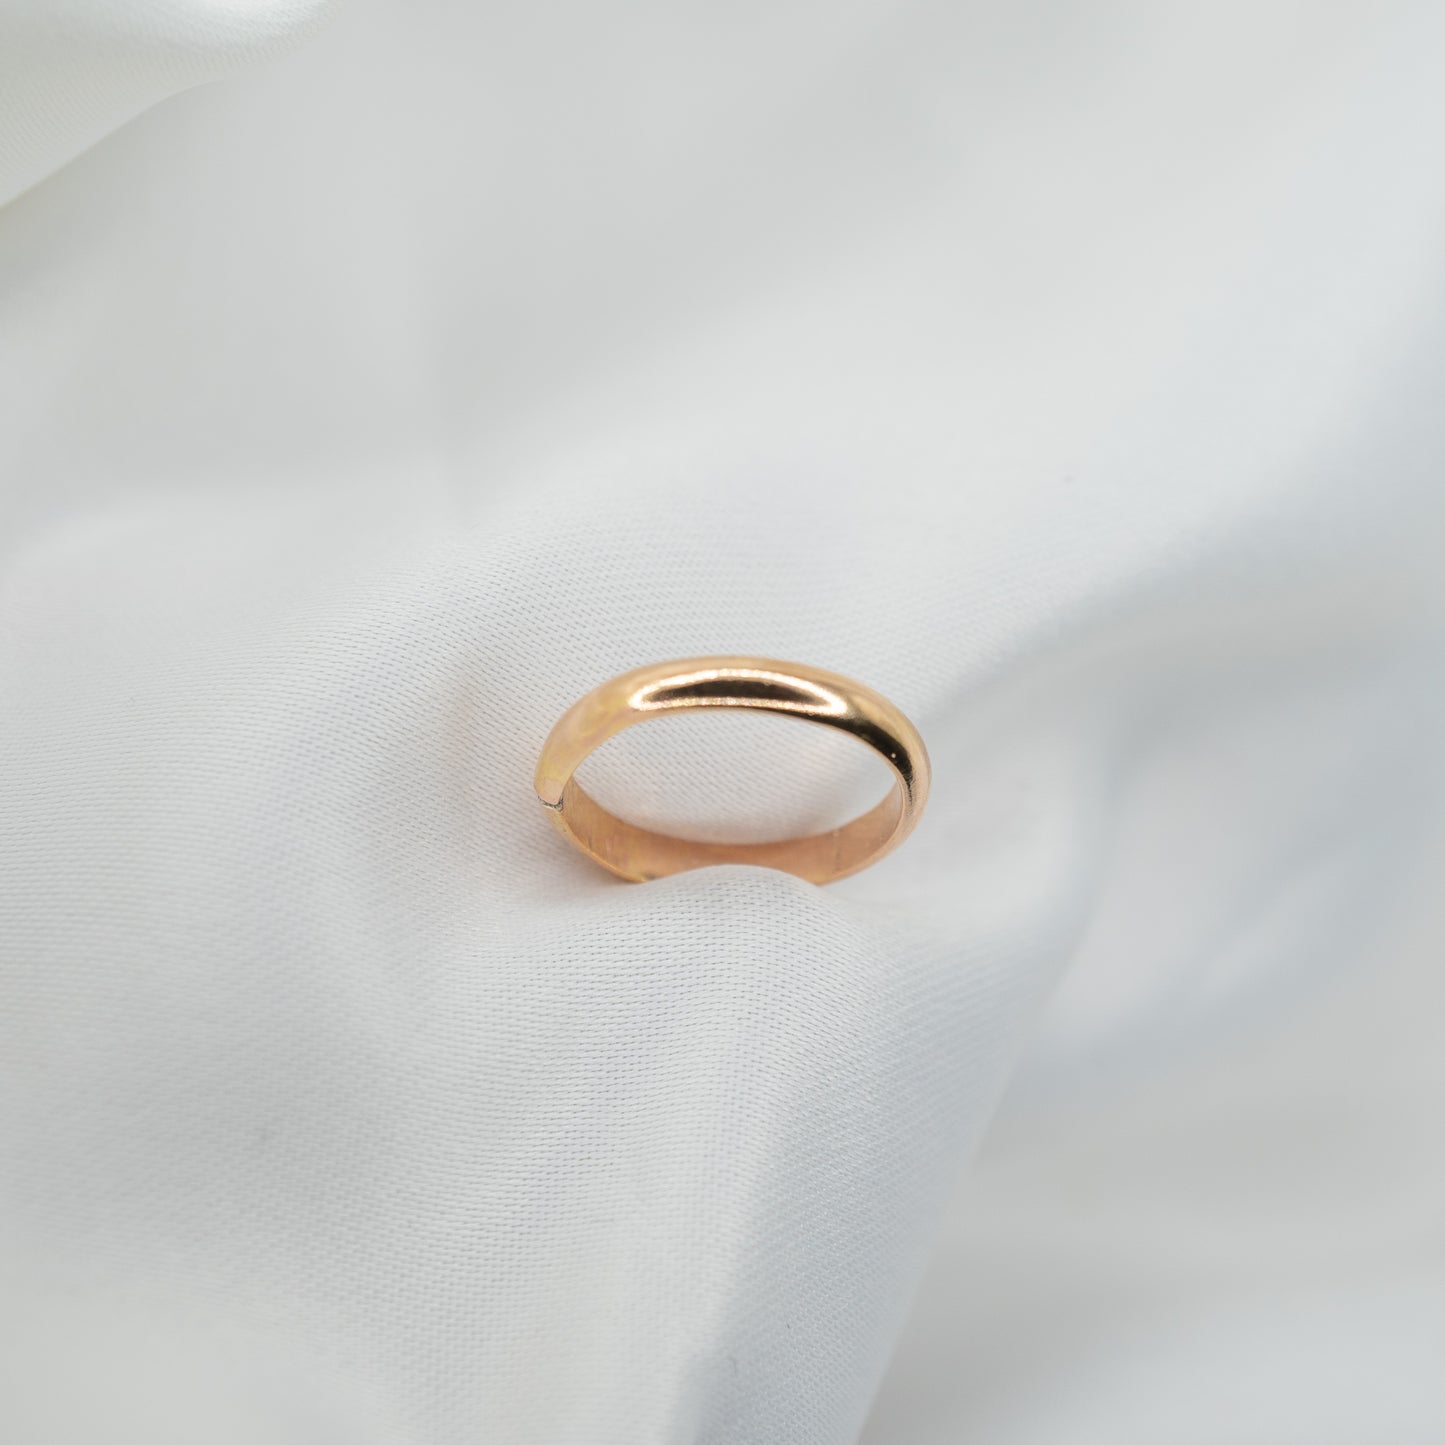 Gold Filled Plain Band Ring - shot on white - top view